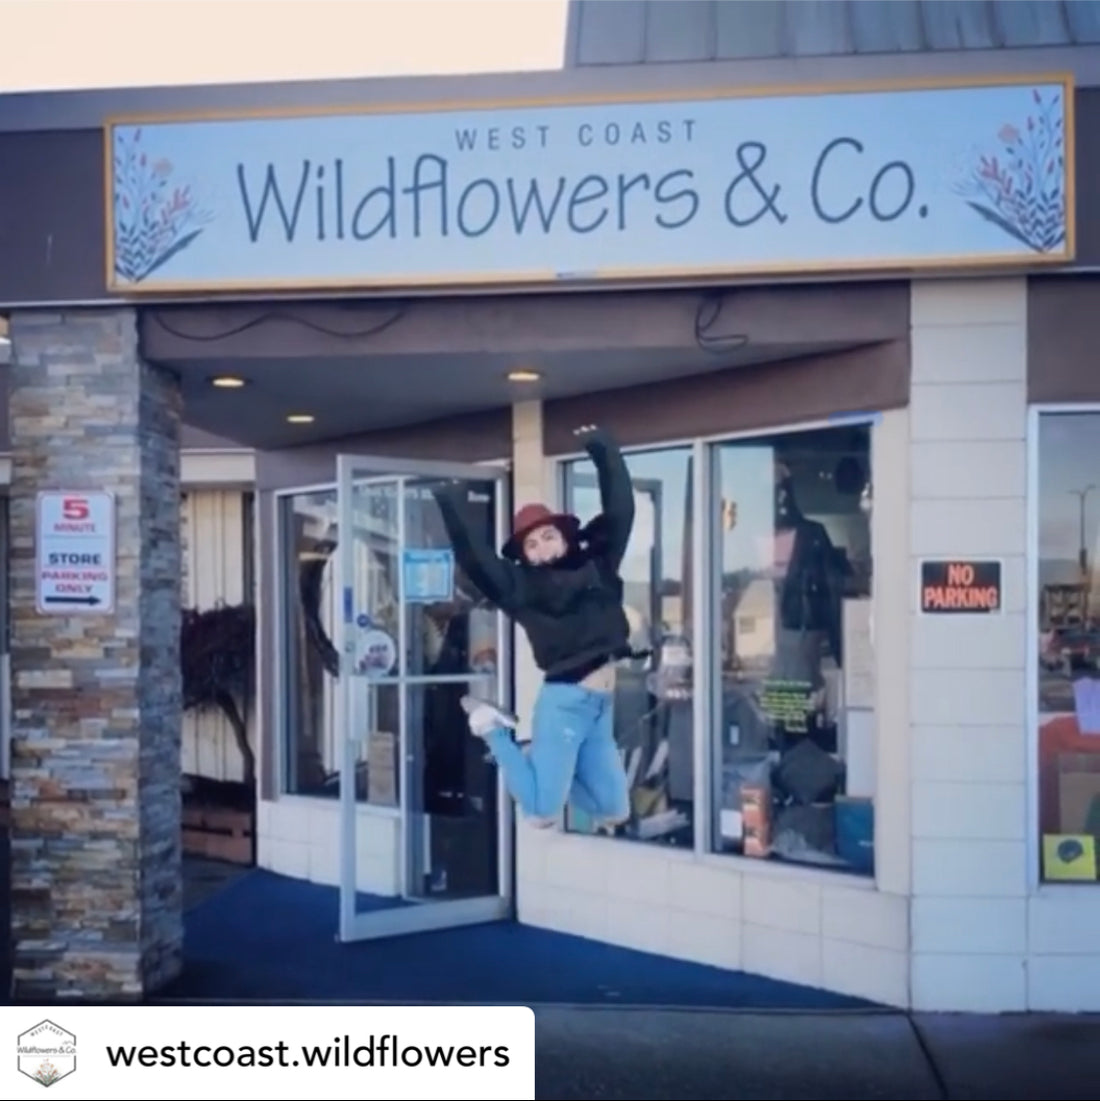 Alissa jumping in excitement in front of the Wildflowers & Co. shop